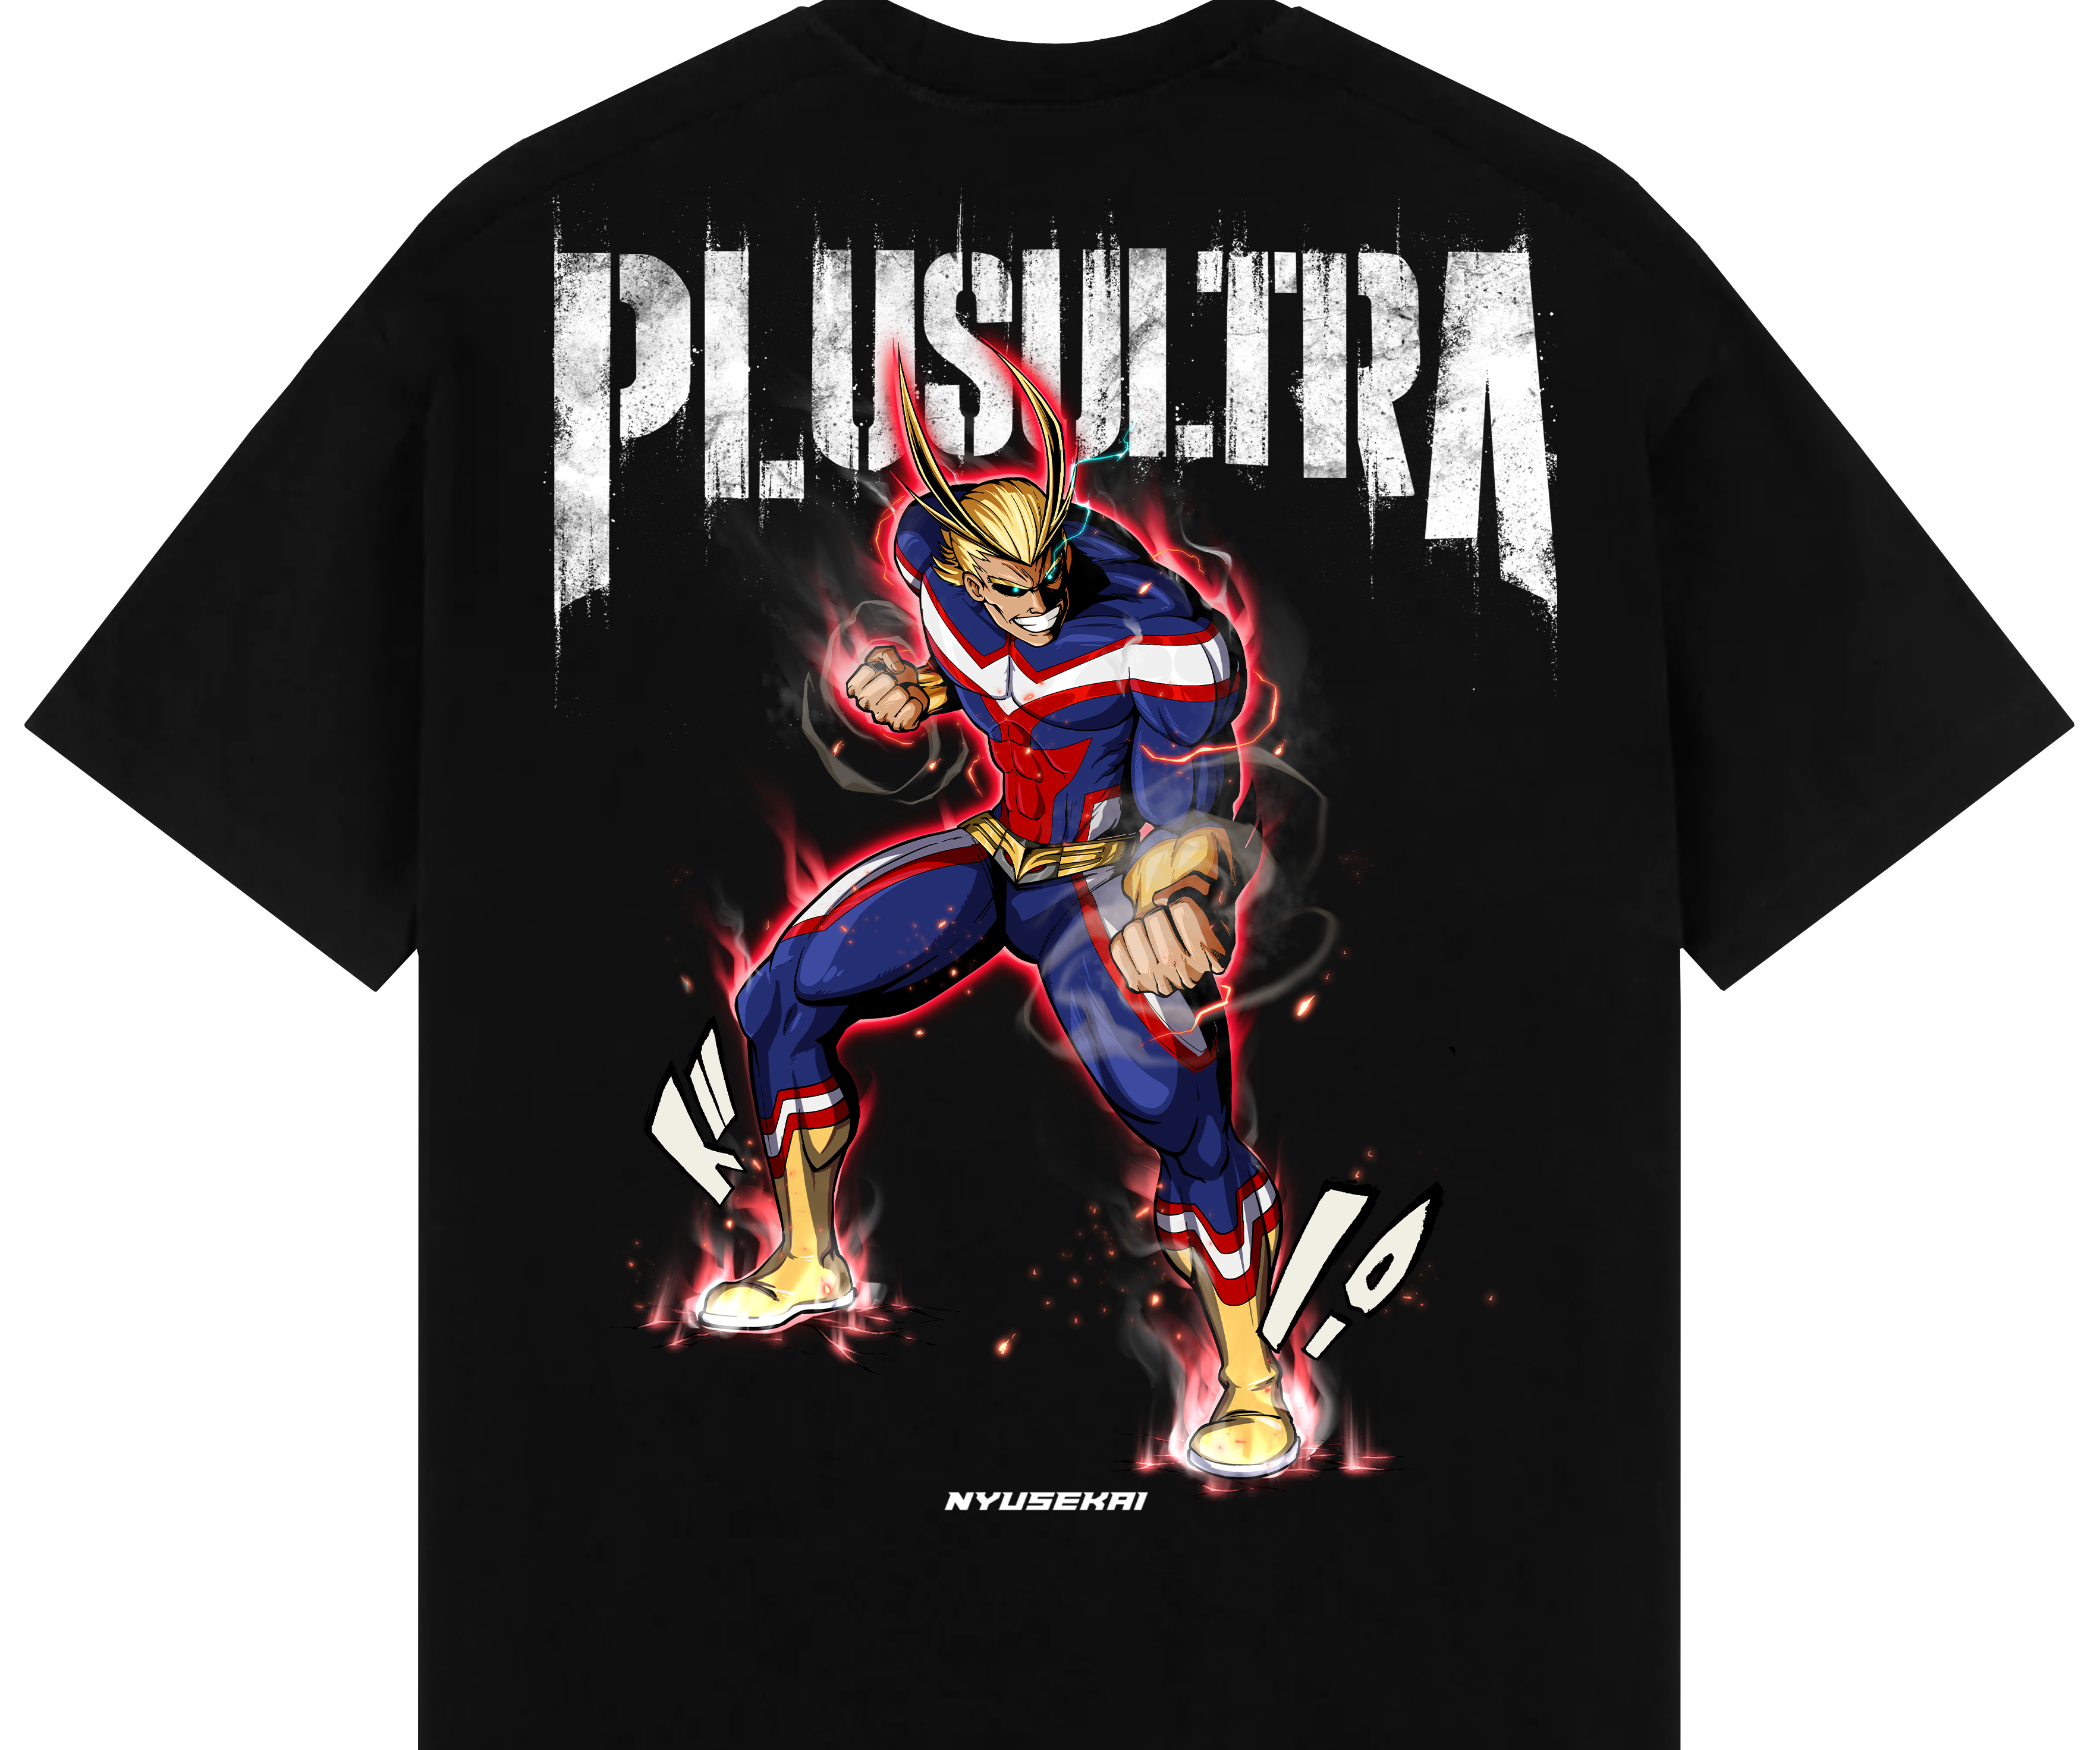 "All Might X Plus Ultra - My Hero Academia" Oversize T-Shirt